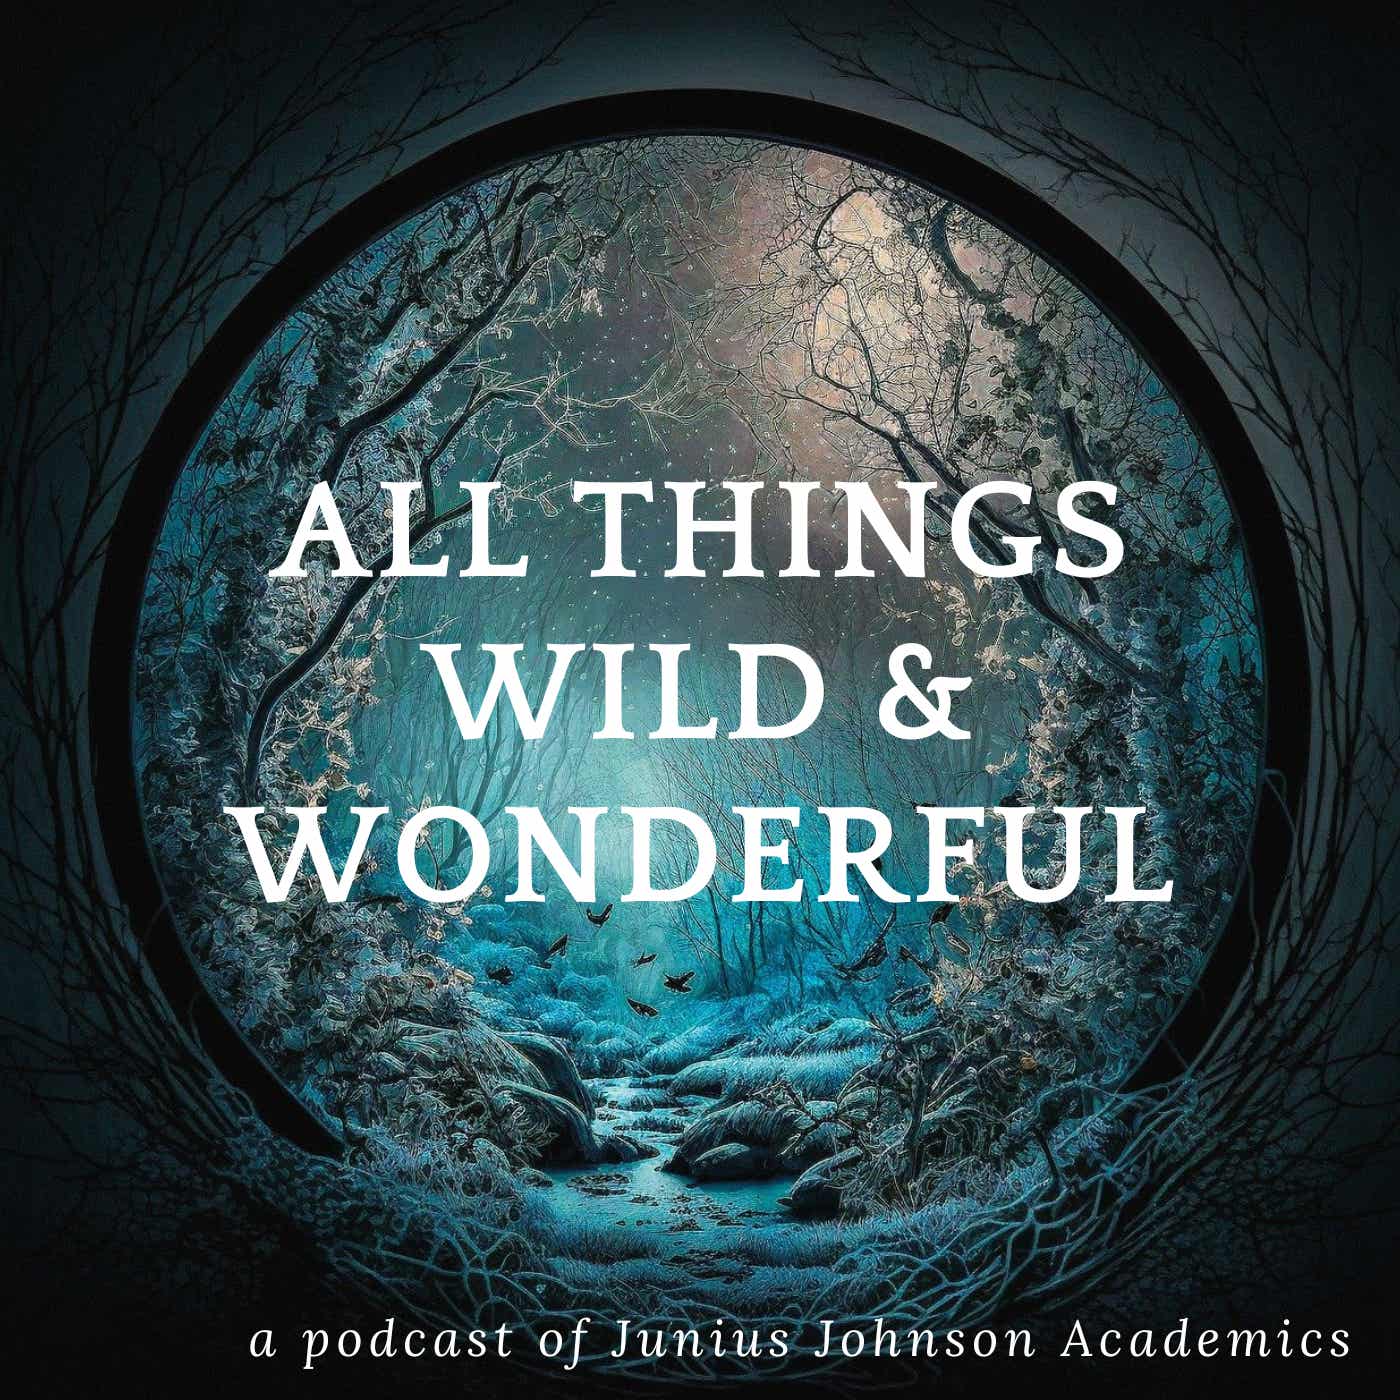 All Things Wild and Wonderful Podcast (private feed for frjohncavin@gmail.com)